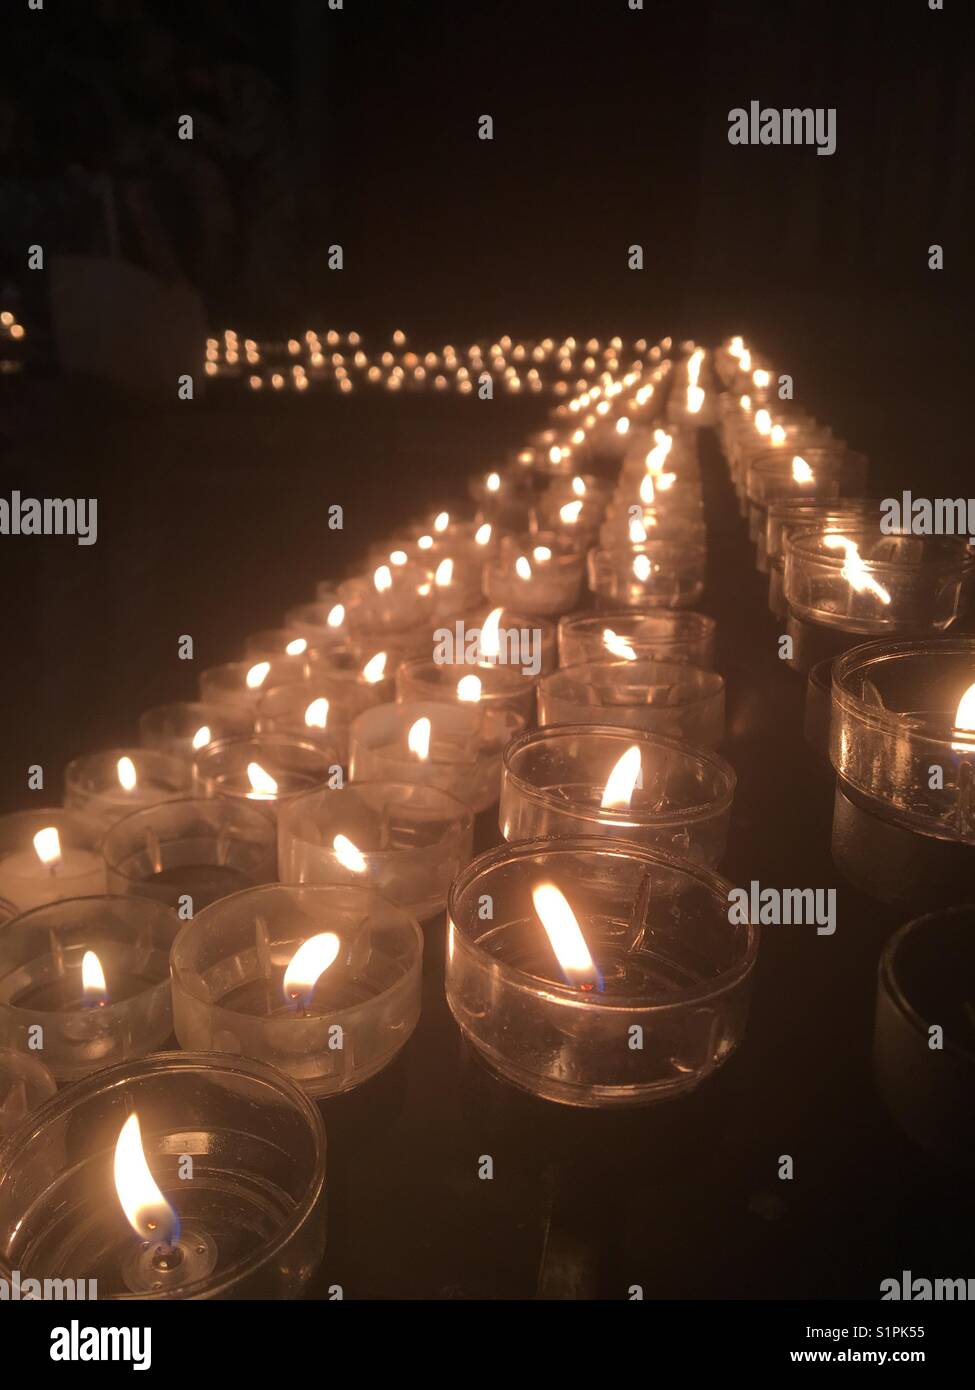 Candles Stock Photo